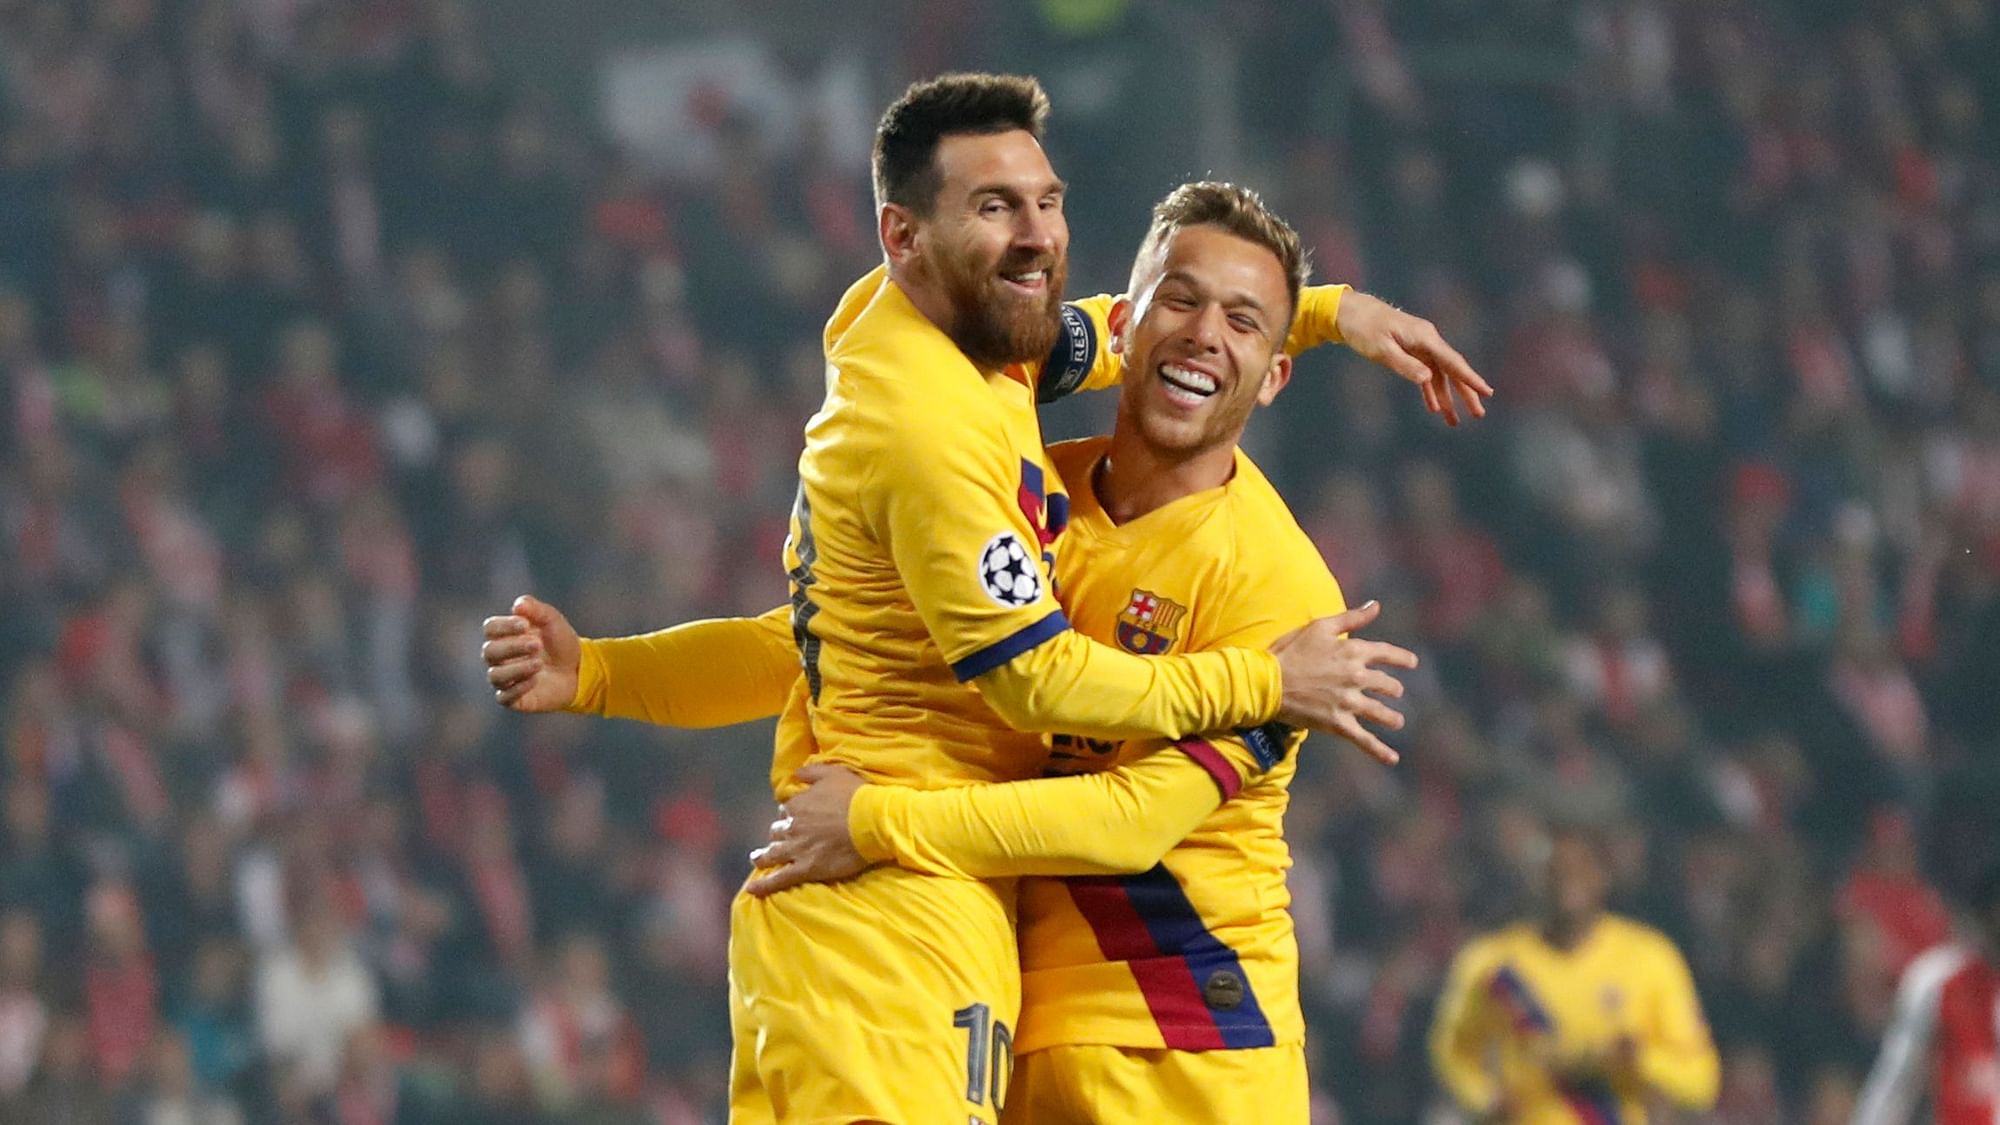 Lionel Messi scored one goal and set up another as Barcelona beat Slavia Prague 2-1 to take control of Group F.